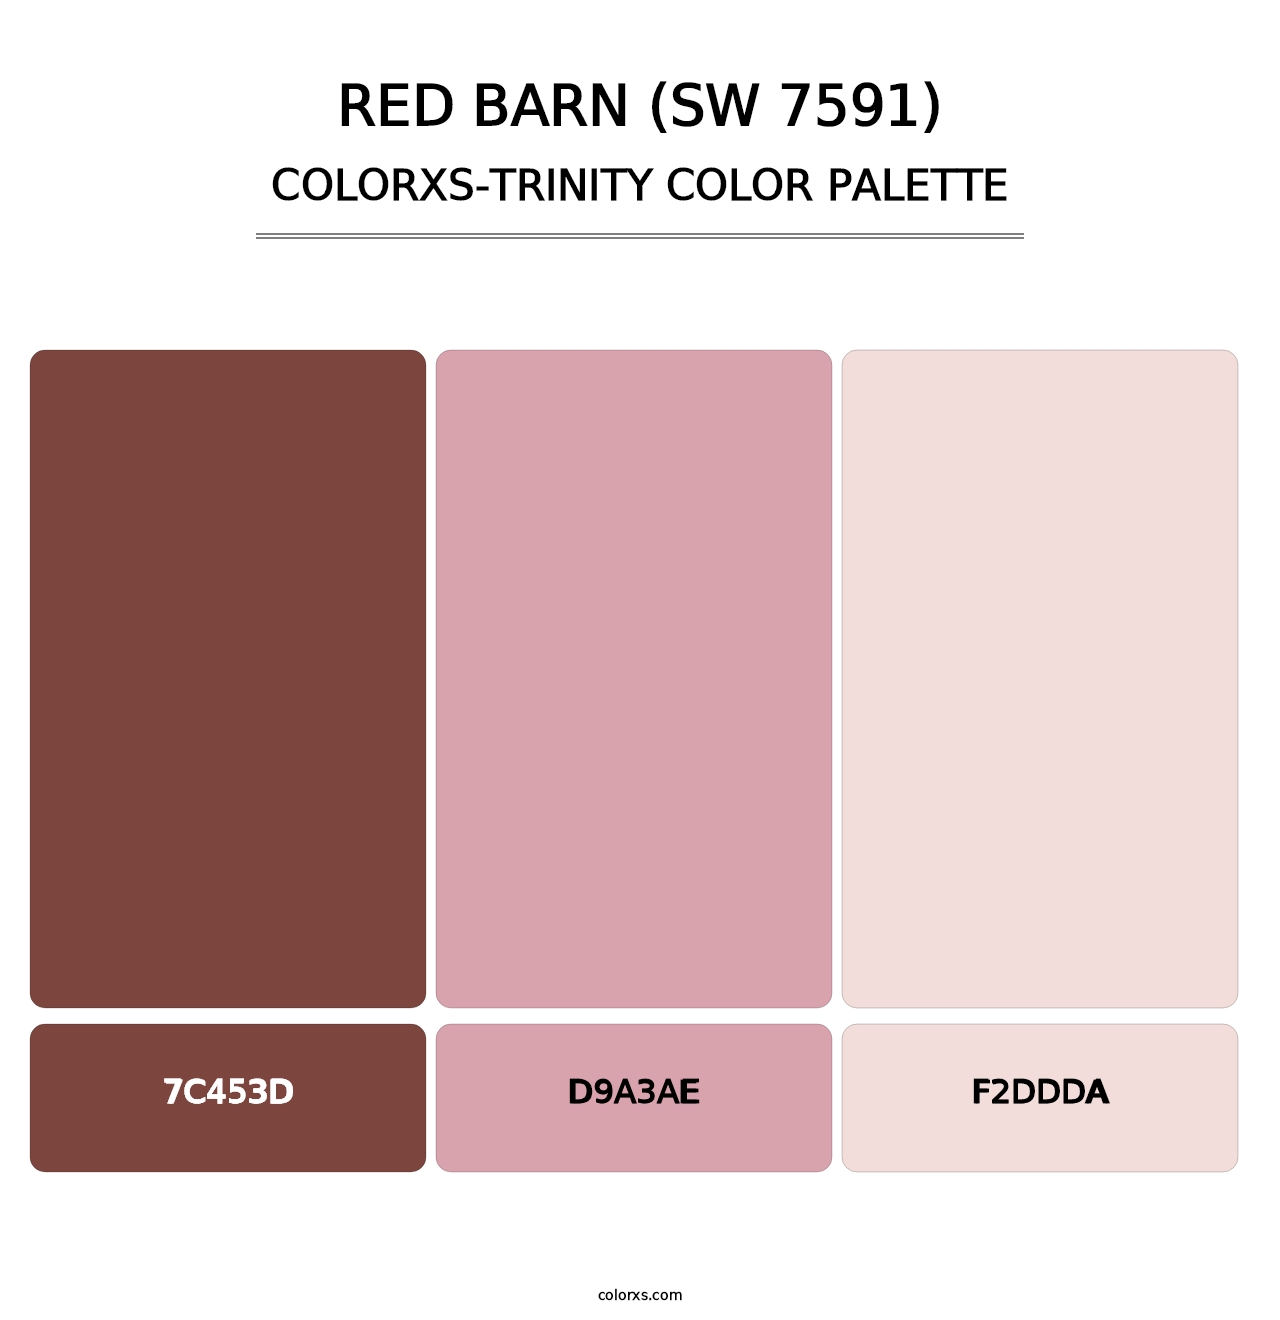 Red Barn (SW 7591) - Colorxs Trinity Palette